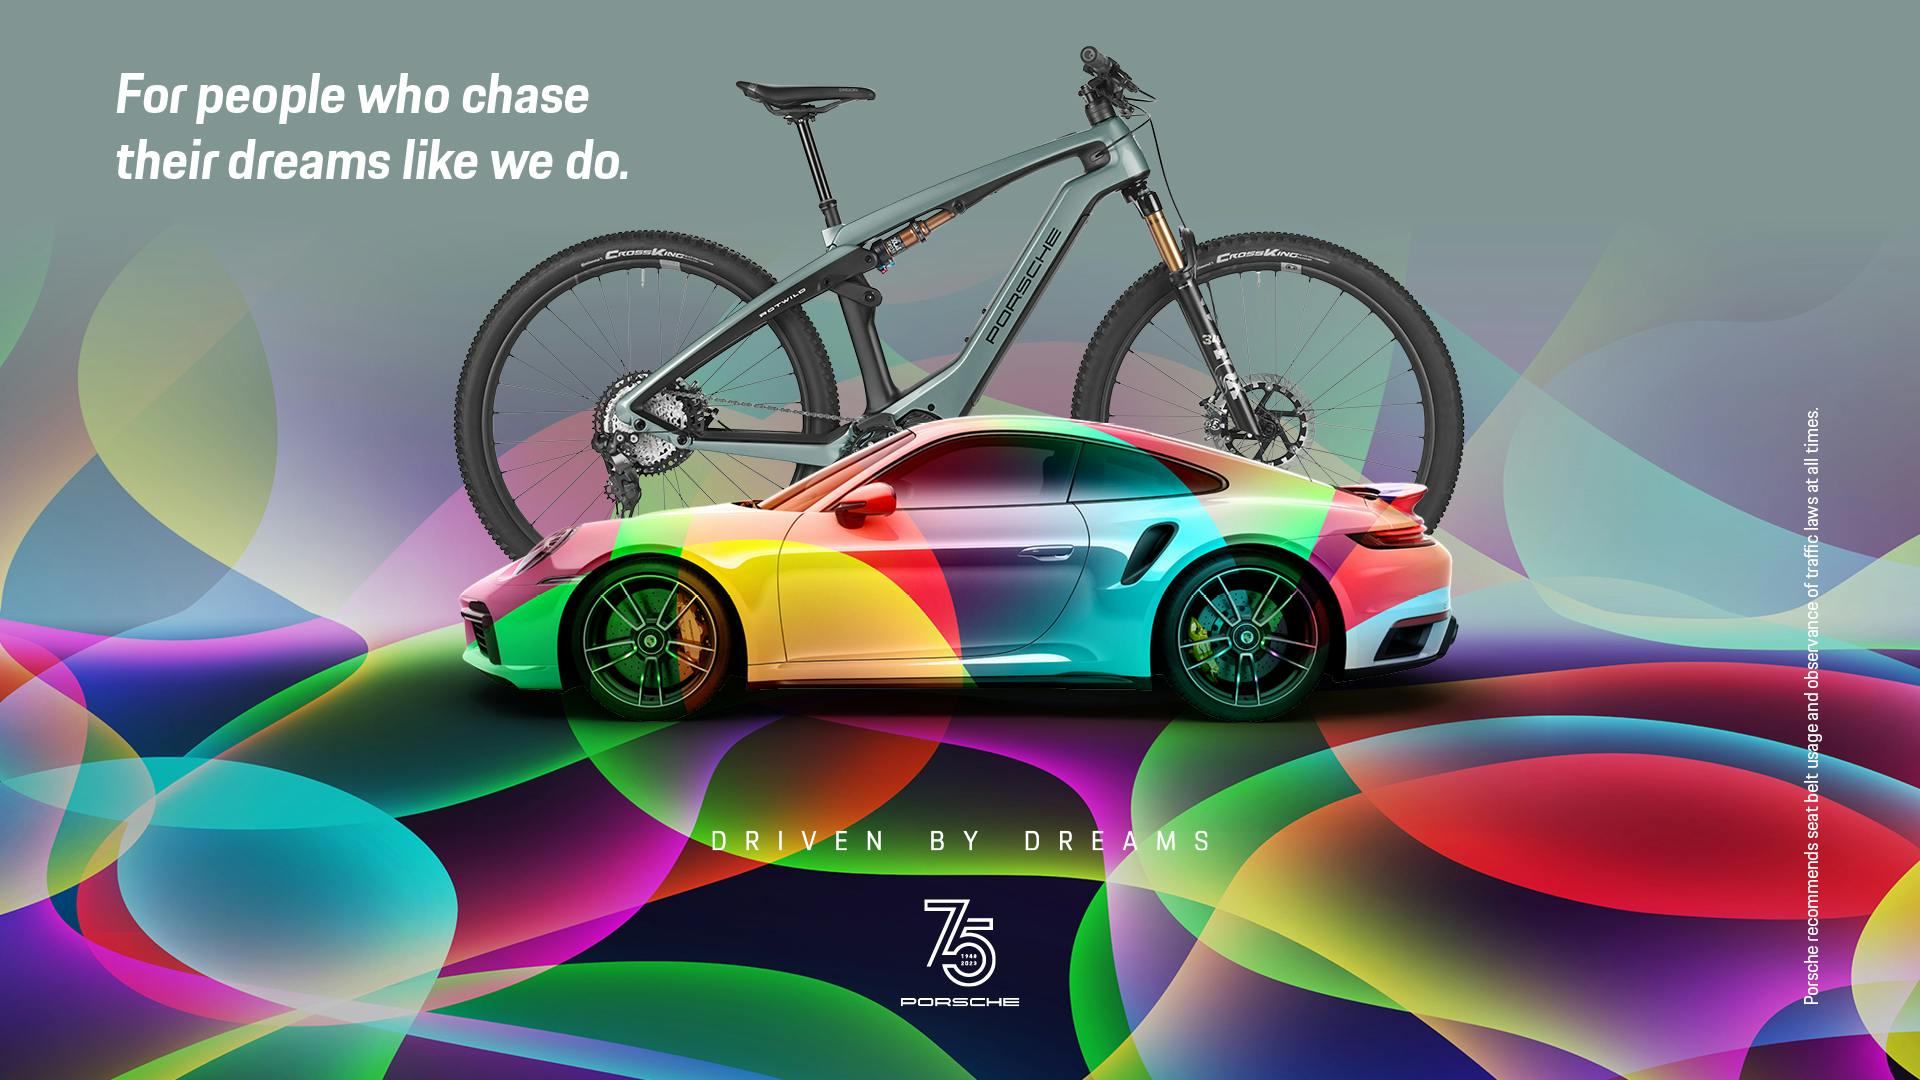 On a colorful background with a gray-black filter is a colorful Porsche 911 with the white lettering "For people who chase their dreams like we do" in the top left corner. In the background of the Porsche 911 there is a Porsche ebike.